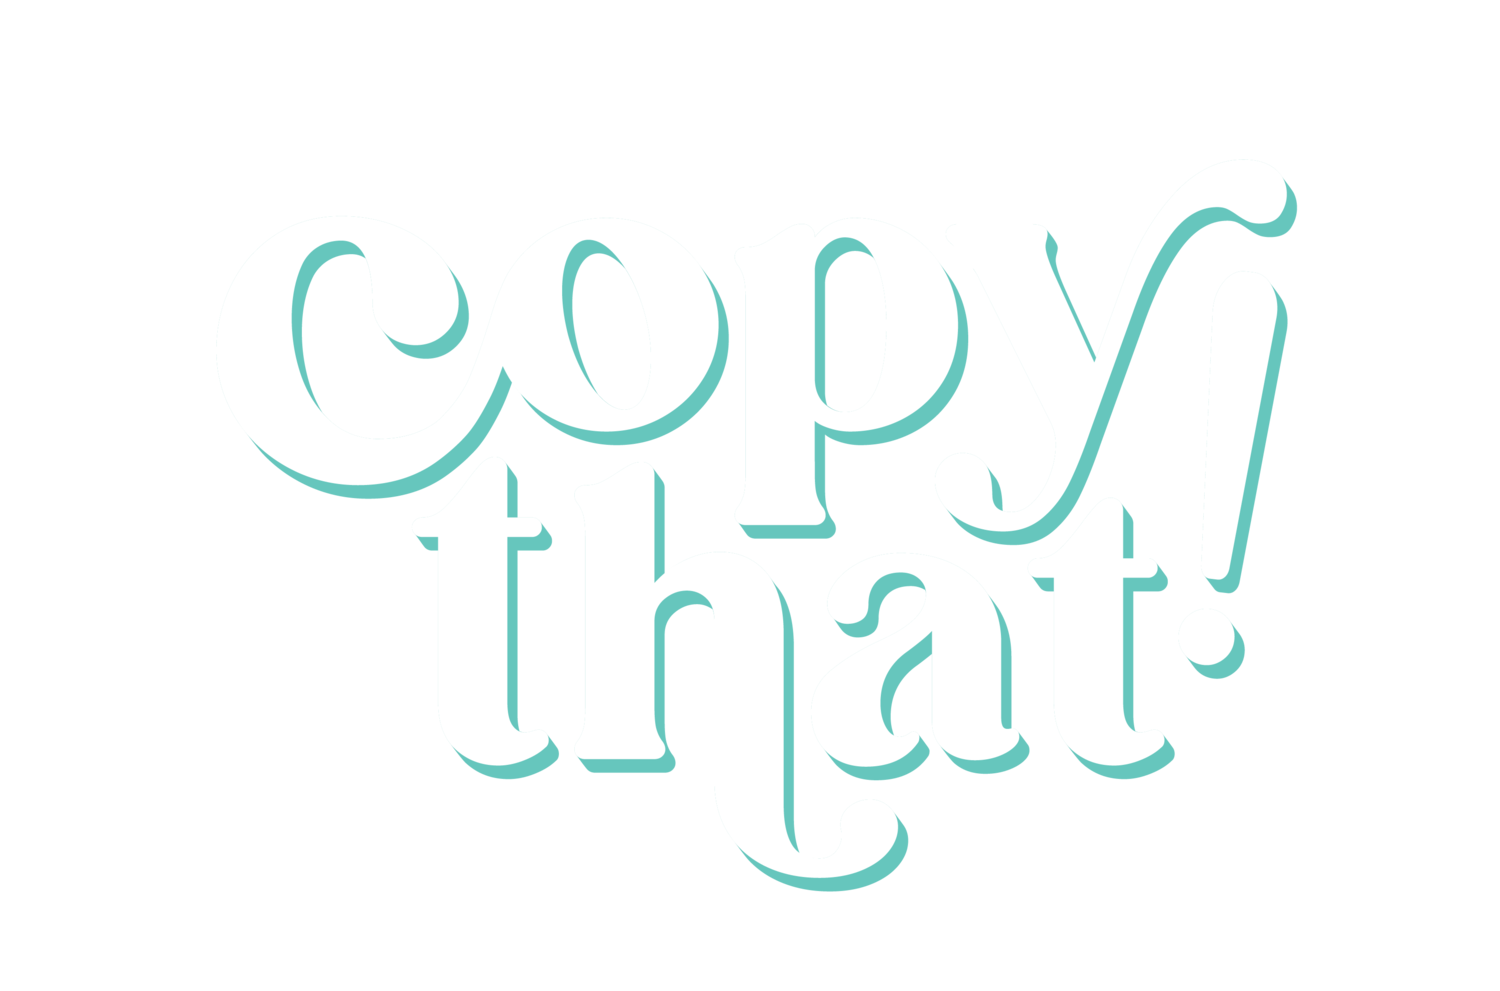 Copy That! Real Estate Writers